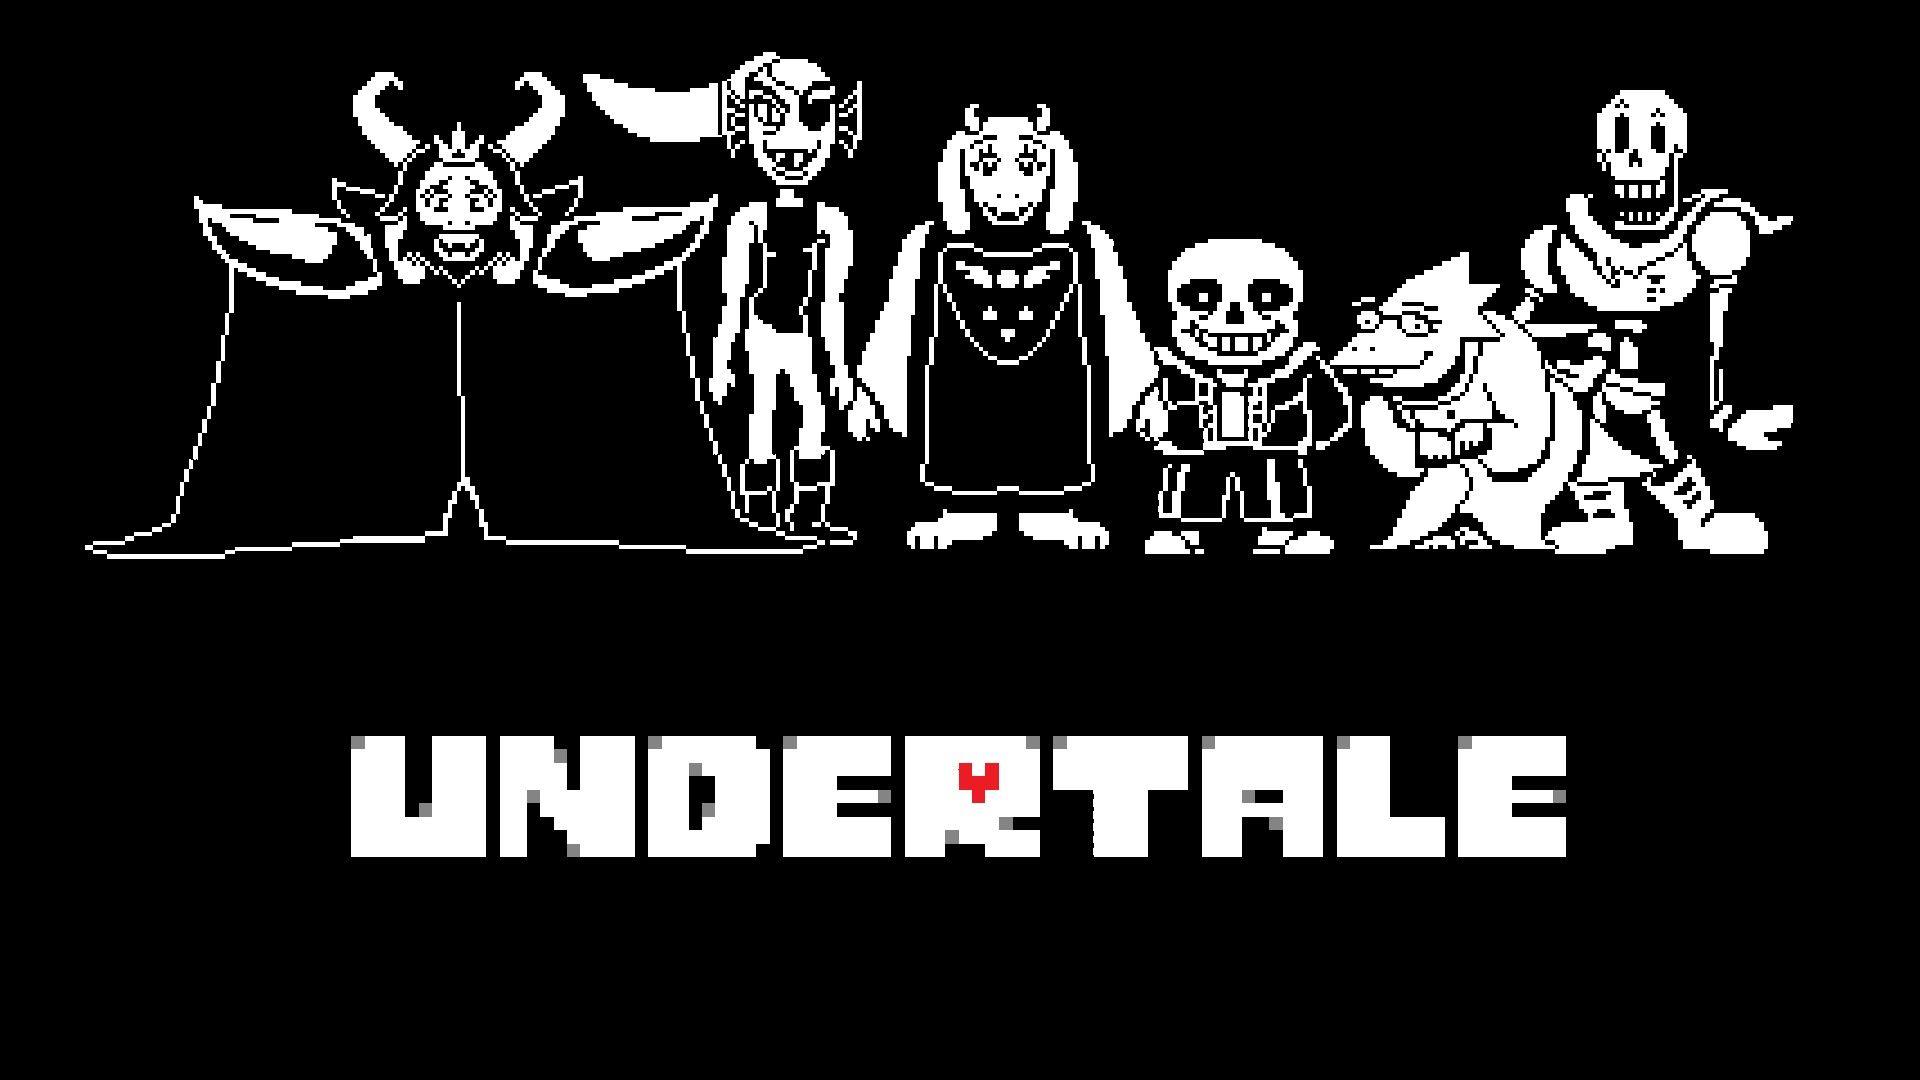 papyrus undertale wallpaper and background